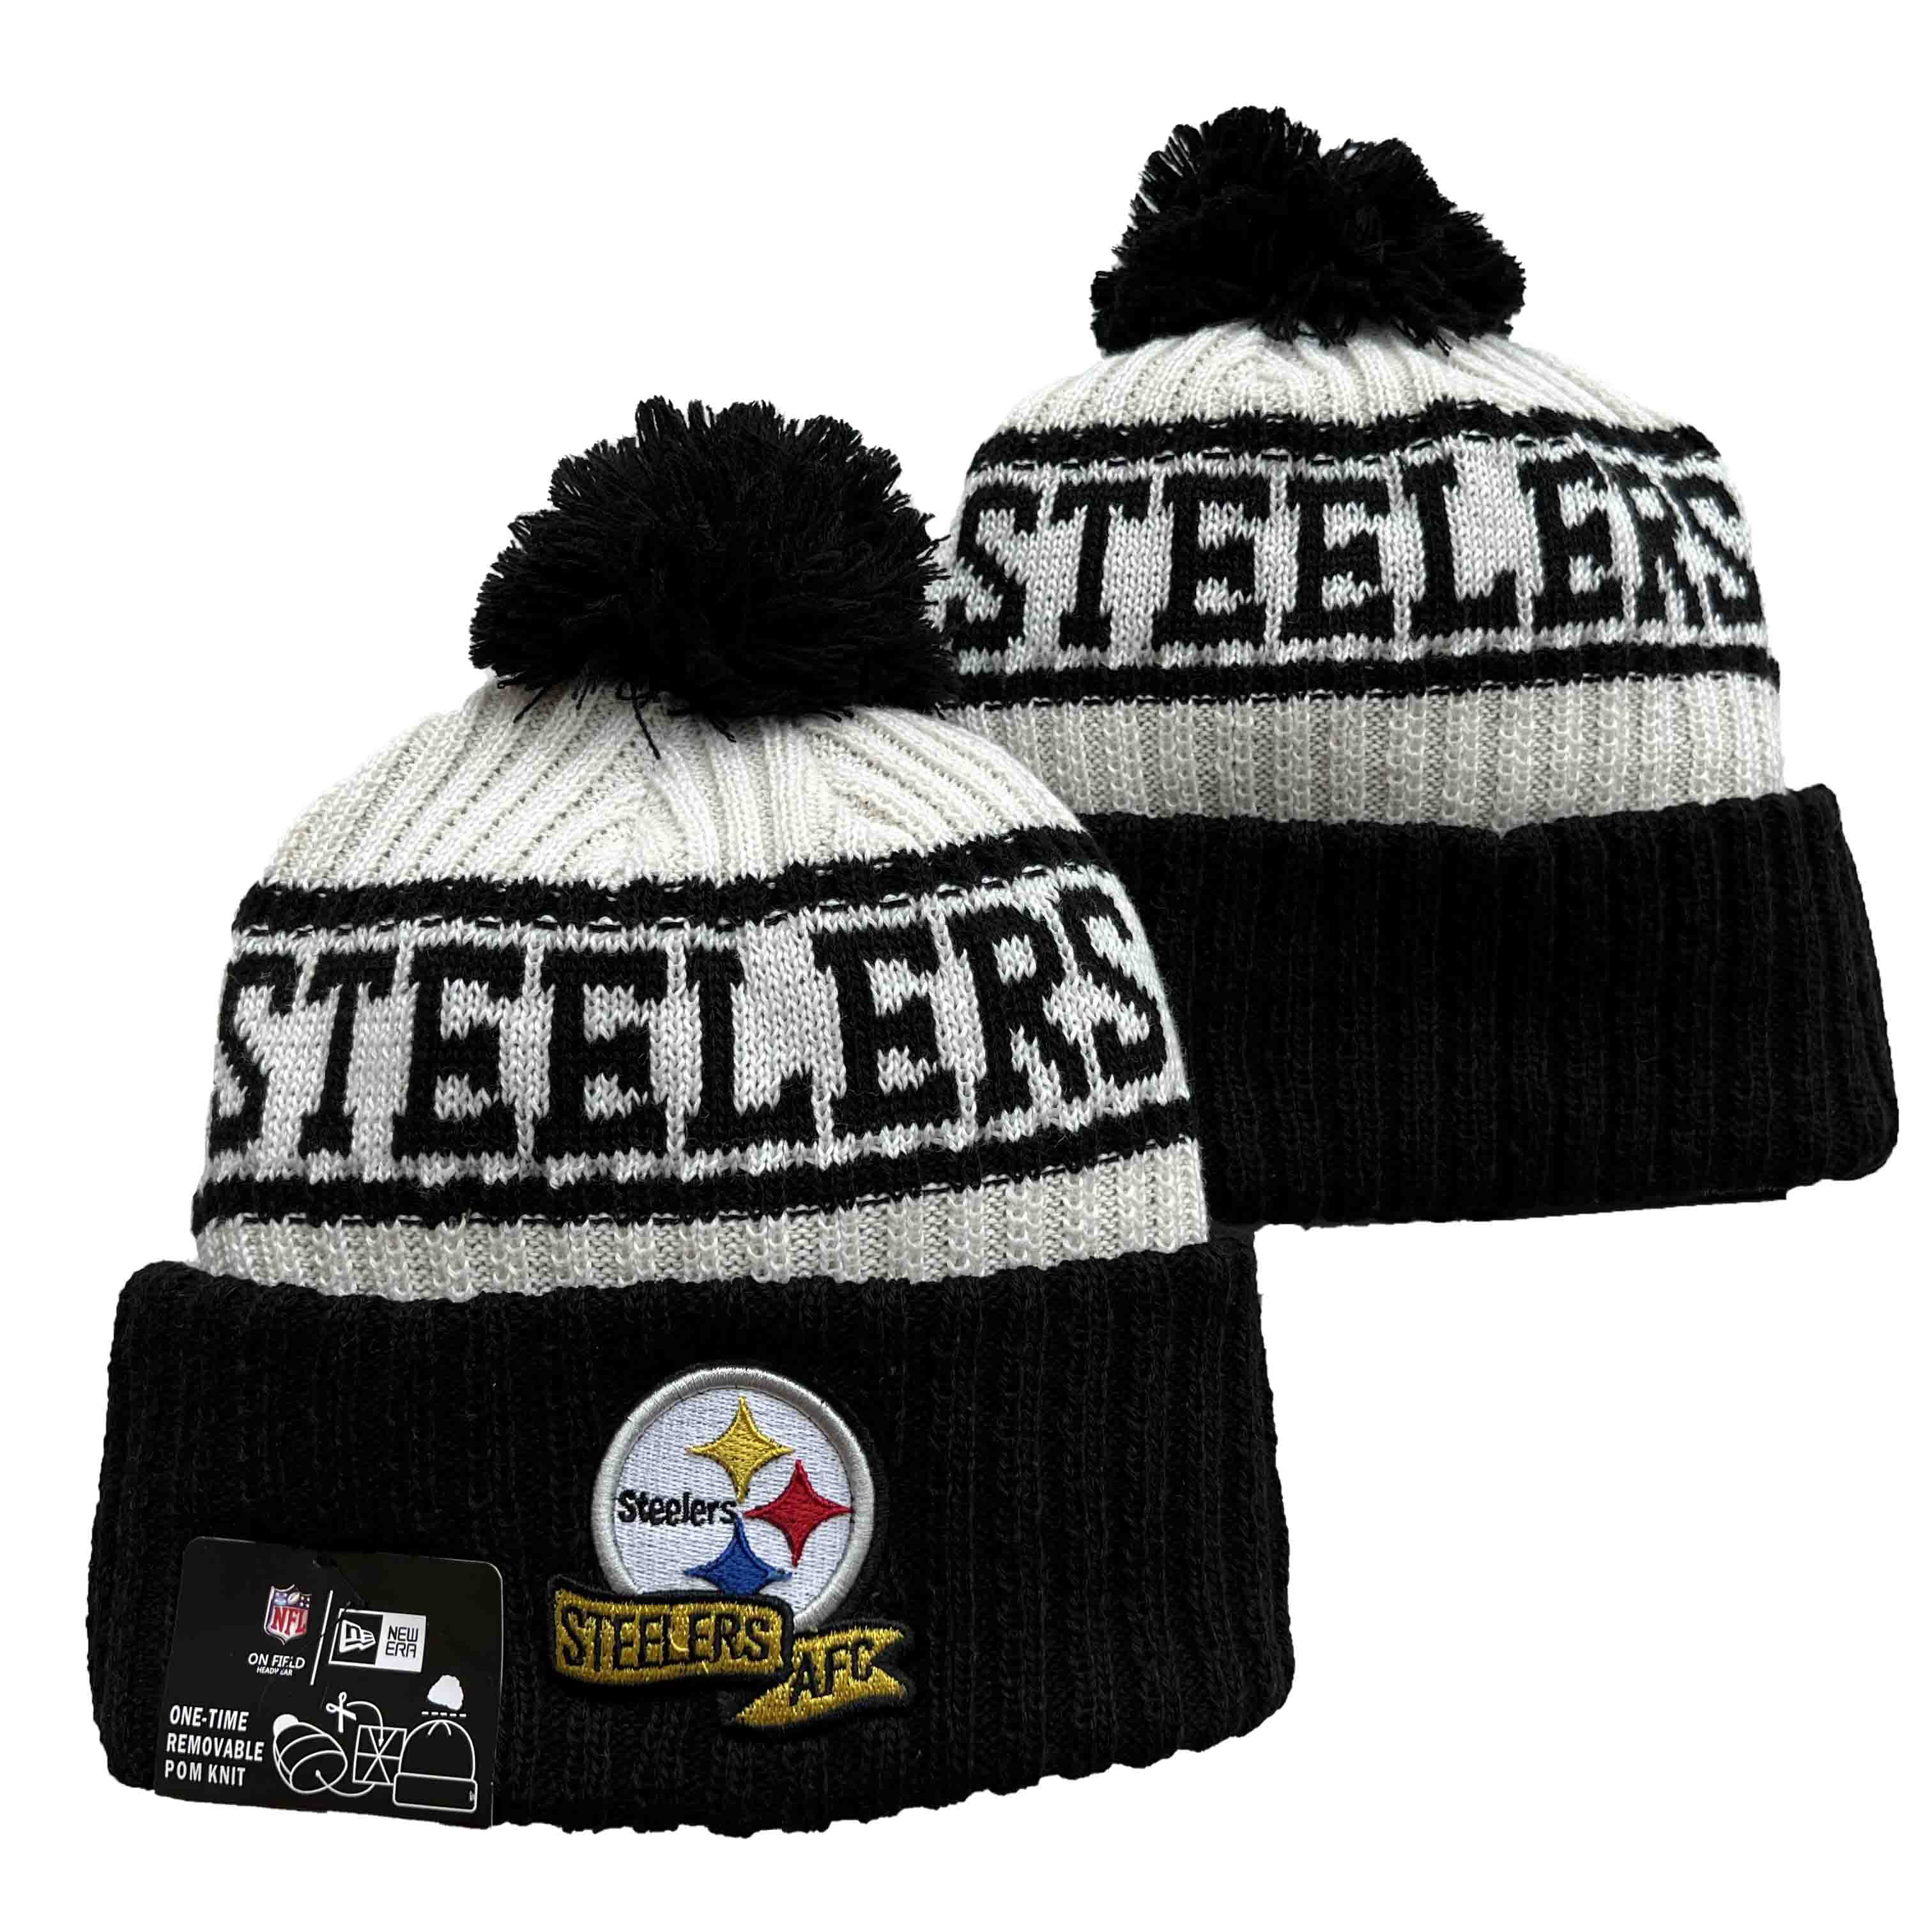 NFL Pittsburgh Steelers Beanies Knit Hats-YD1162